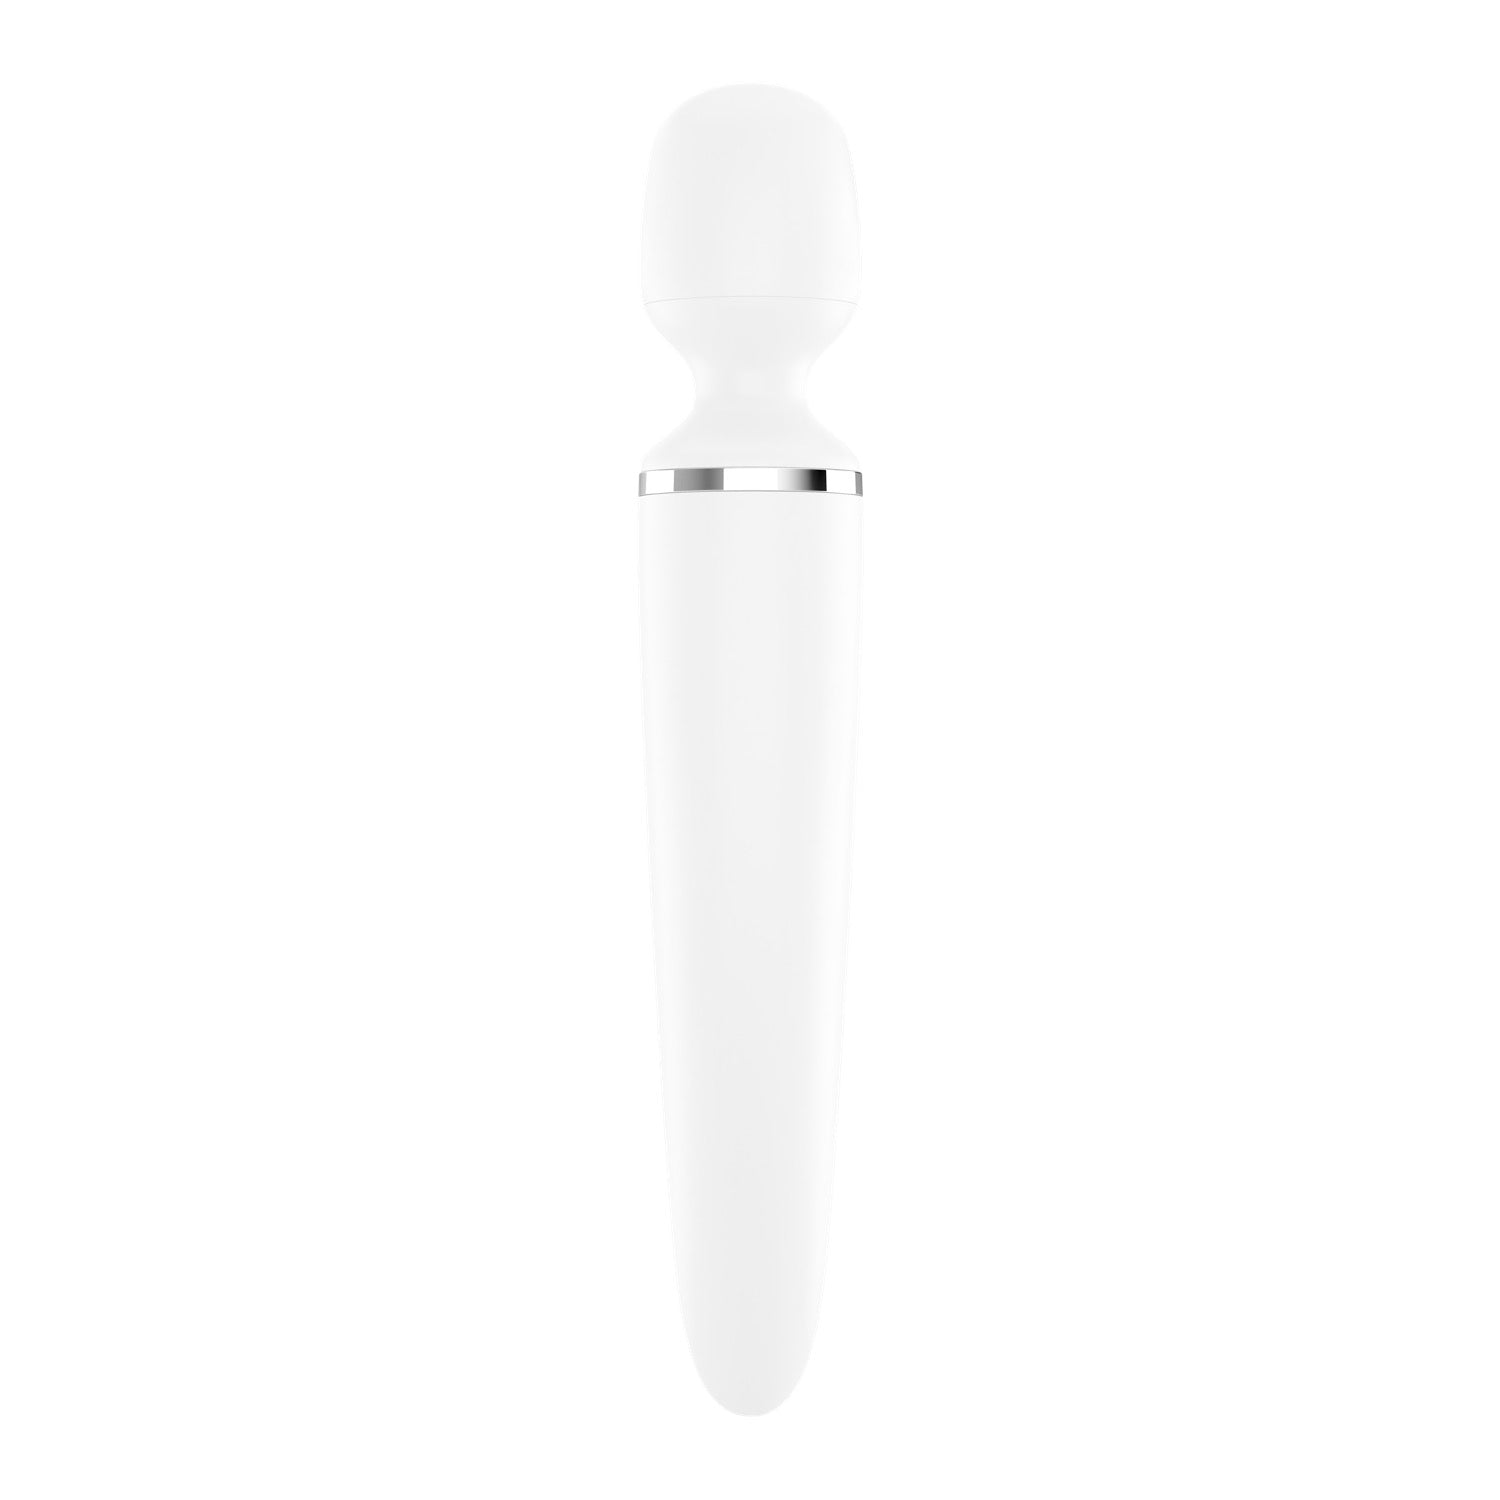 Satisfyer Wand-er Woman - White by Satisfyer